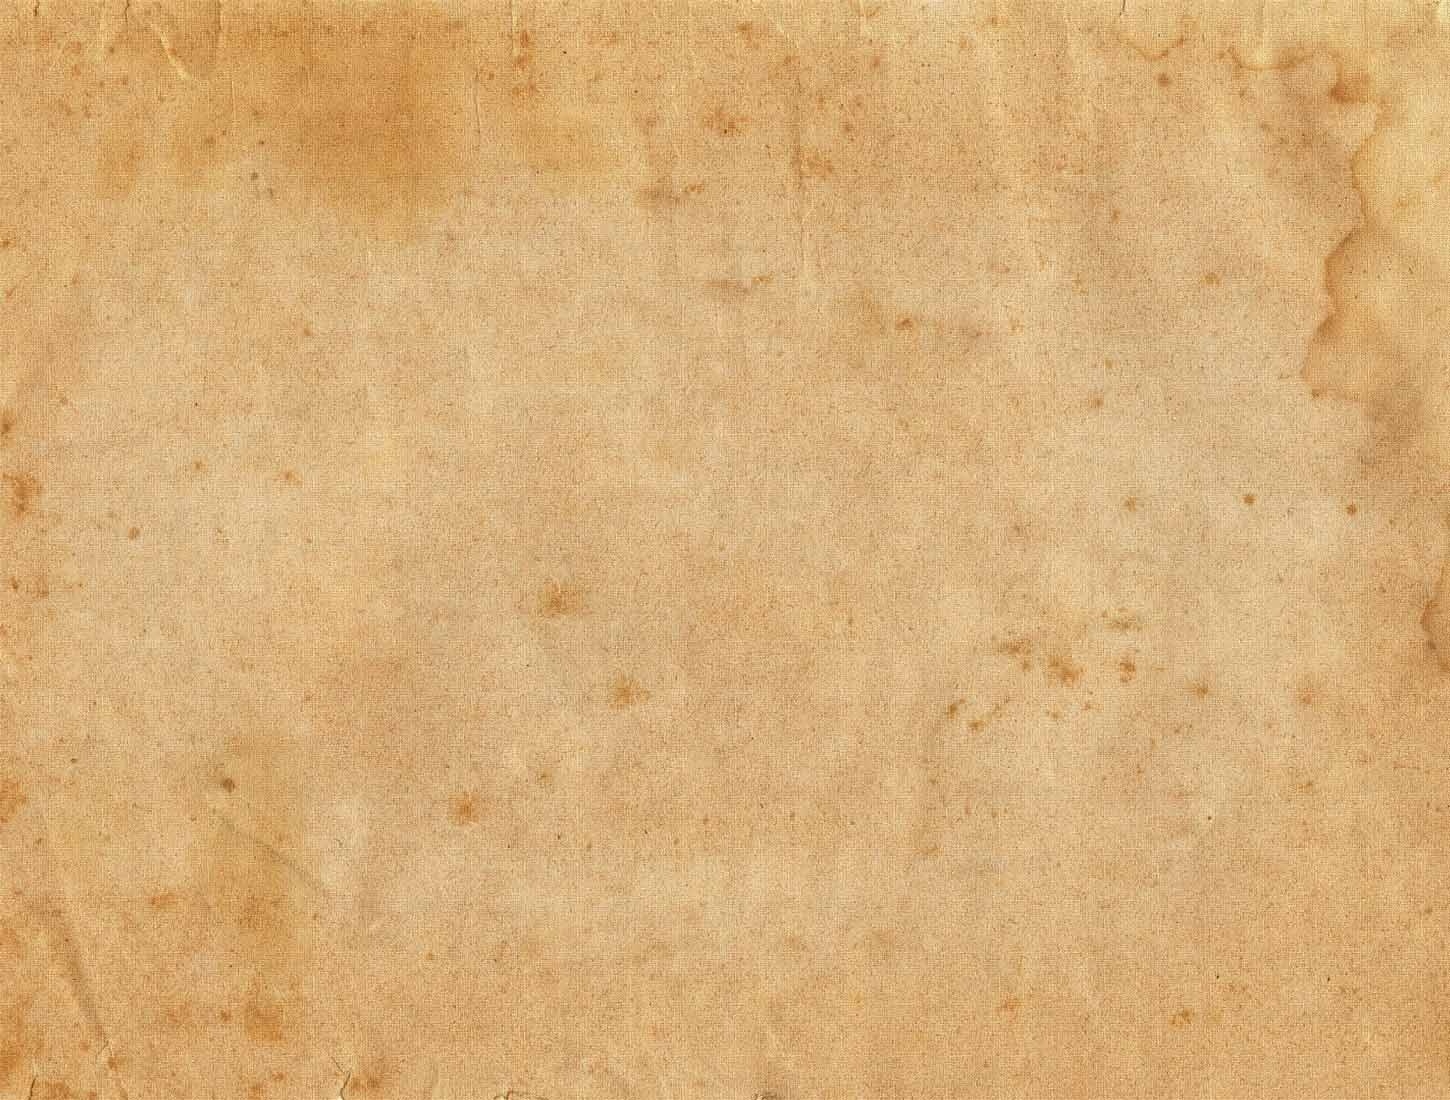 Old Beige Blank Paper Free Ppt Backgrounds For Your Powerpoint